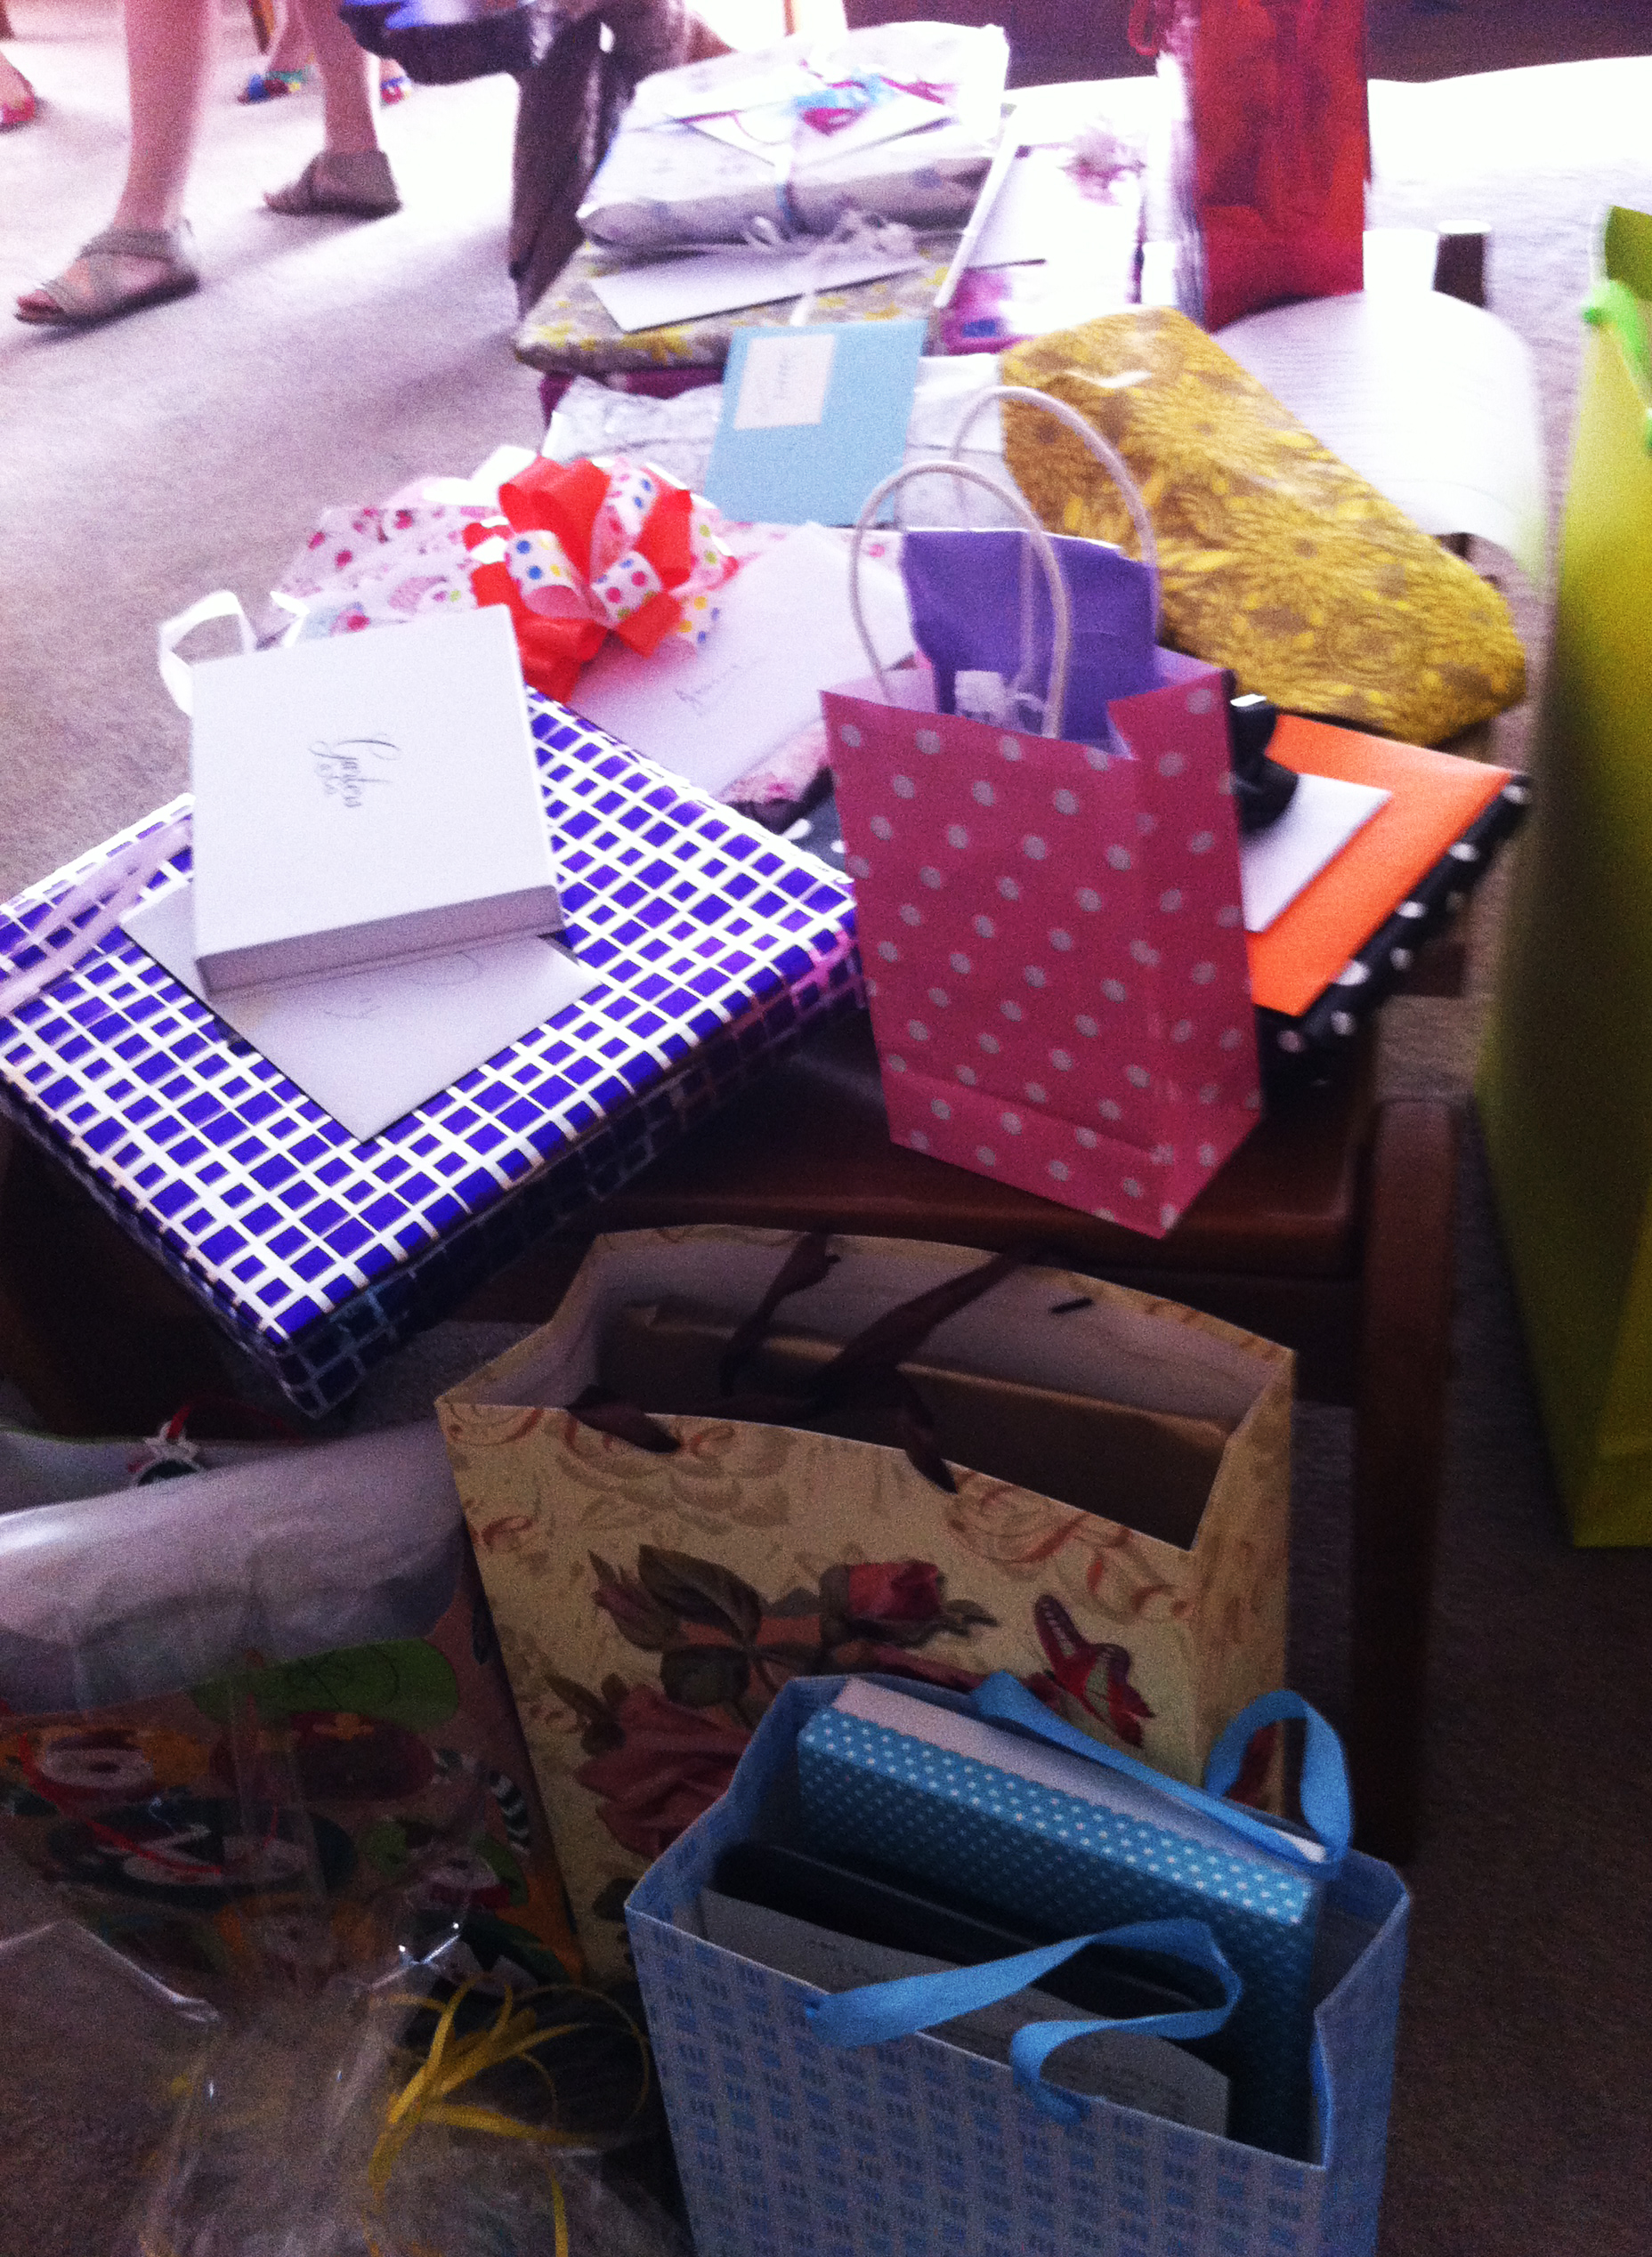 All the presents!